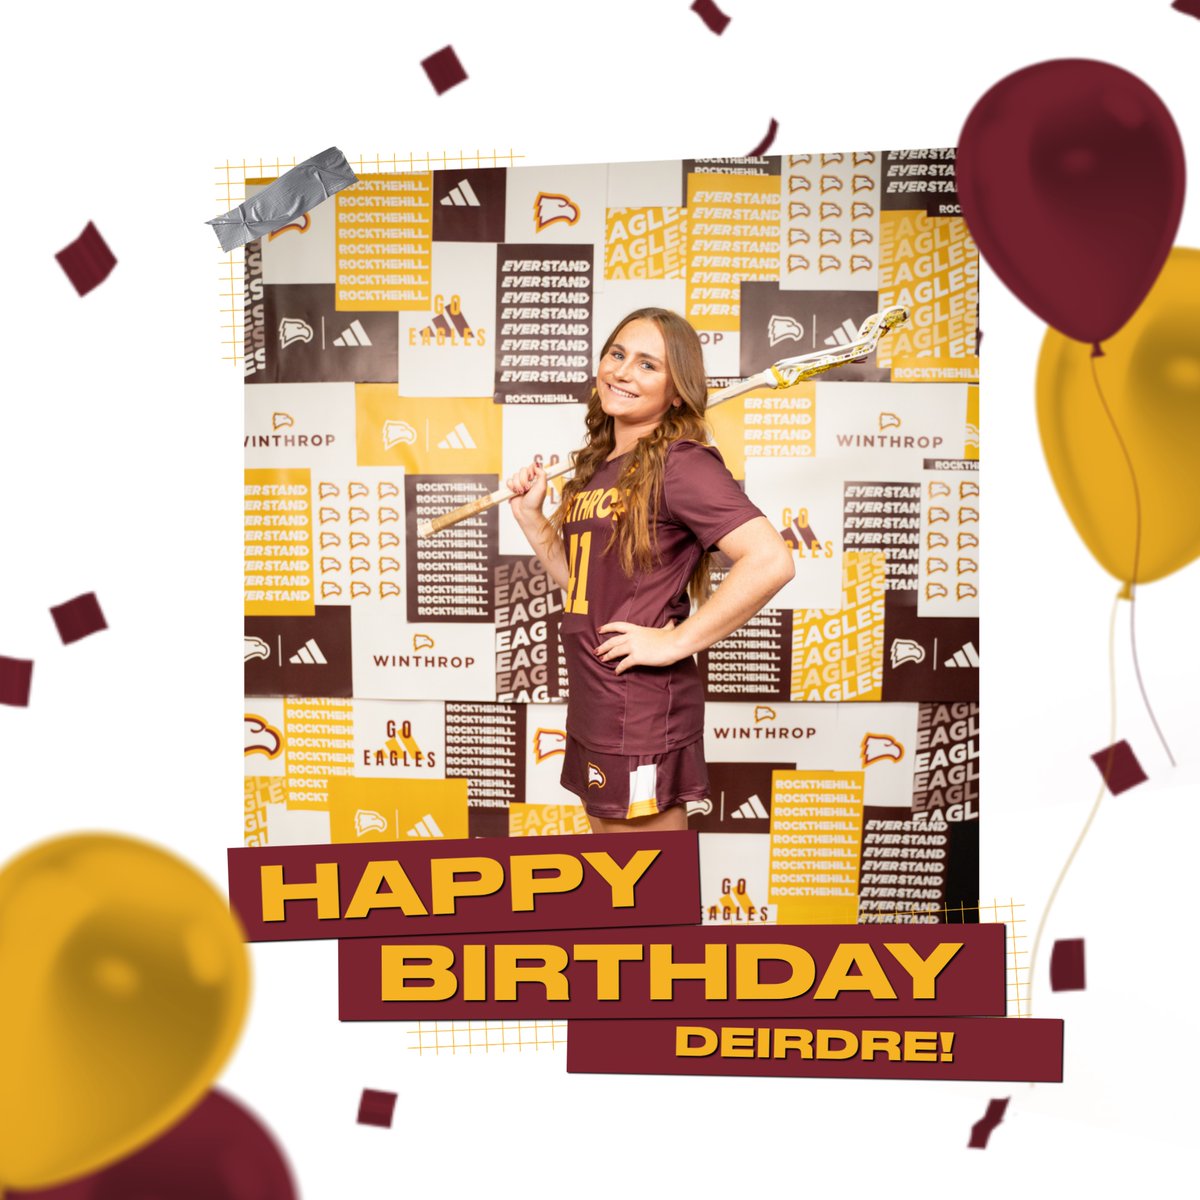 Please join us in wishing 𝓗𝓪𝓹𝓹𝔂 𝓑𝓲𝓻𝓽𝓱𝓭𝓪𝔂 to sophomore attacker, Deirdre Kelly! We hope today is as awesome as you! 🥳💛 . #GoEagles | #ROCKtheHILL